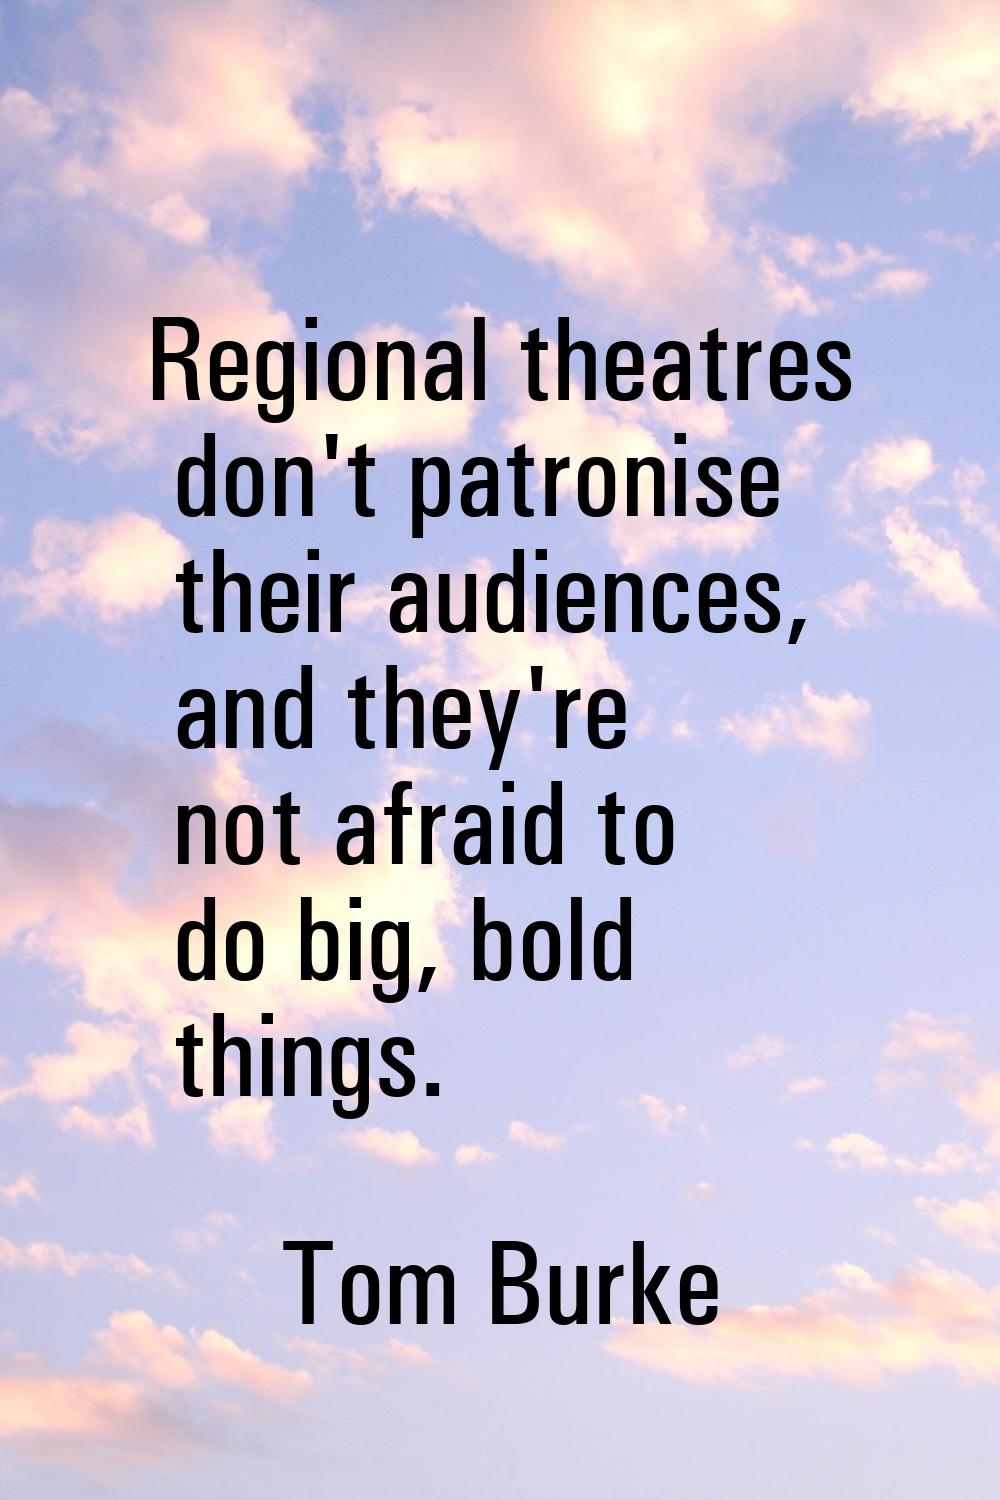 Regional theatres don't patronise their audiences, and they're not afraid to do big, bold things.